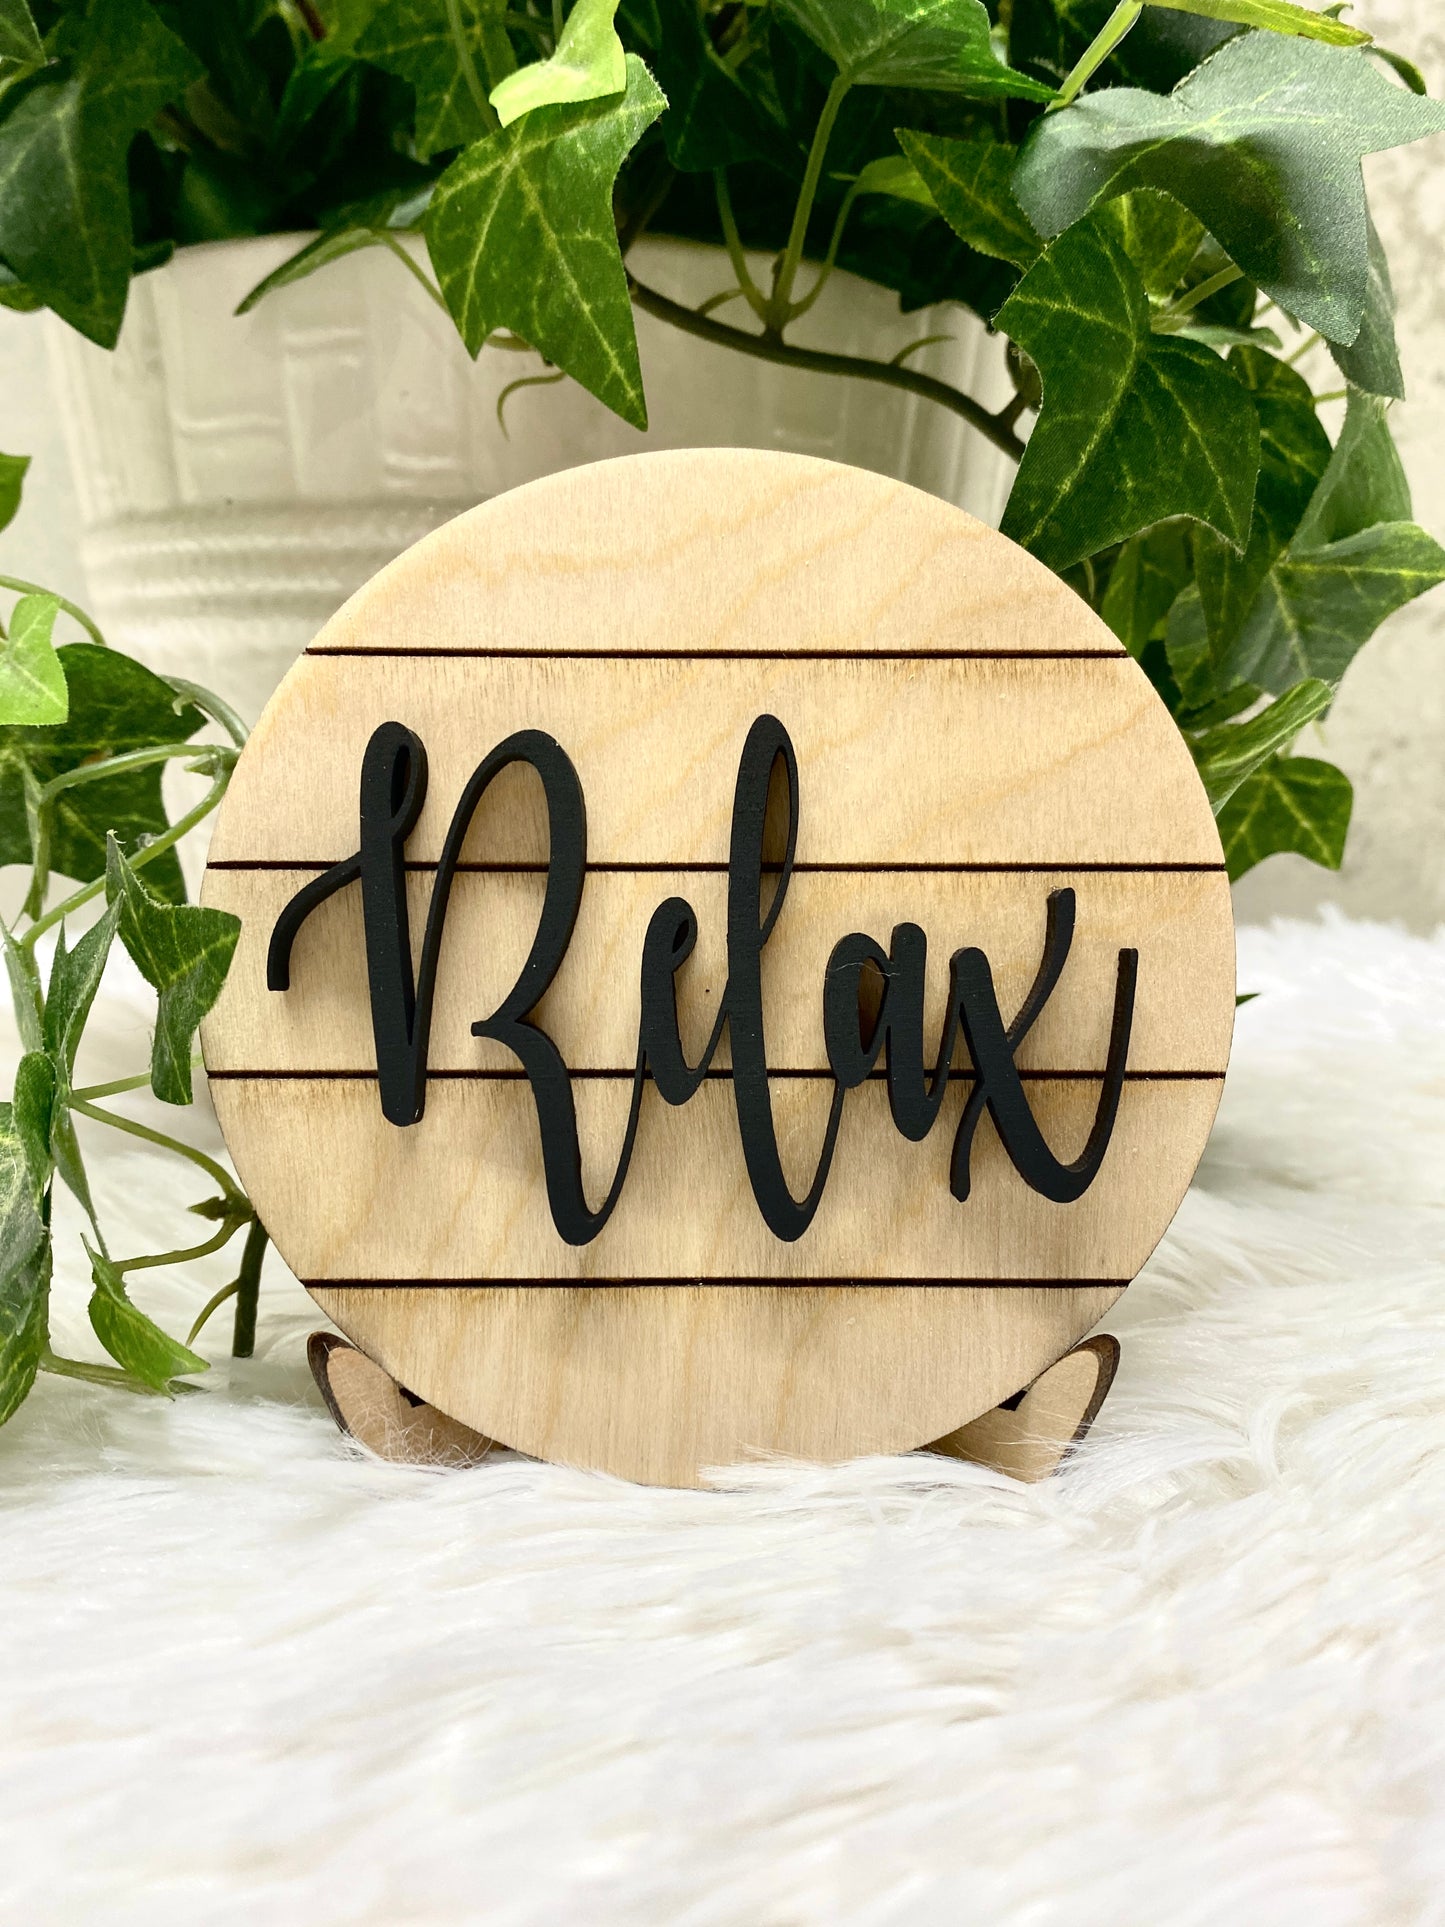 Relax Round Farmhouse Tiered Tray Sign, Relax Bathroom Shelf Sign